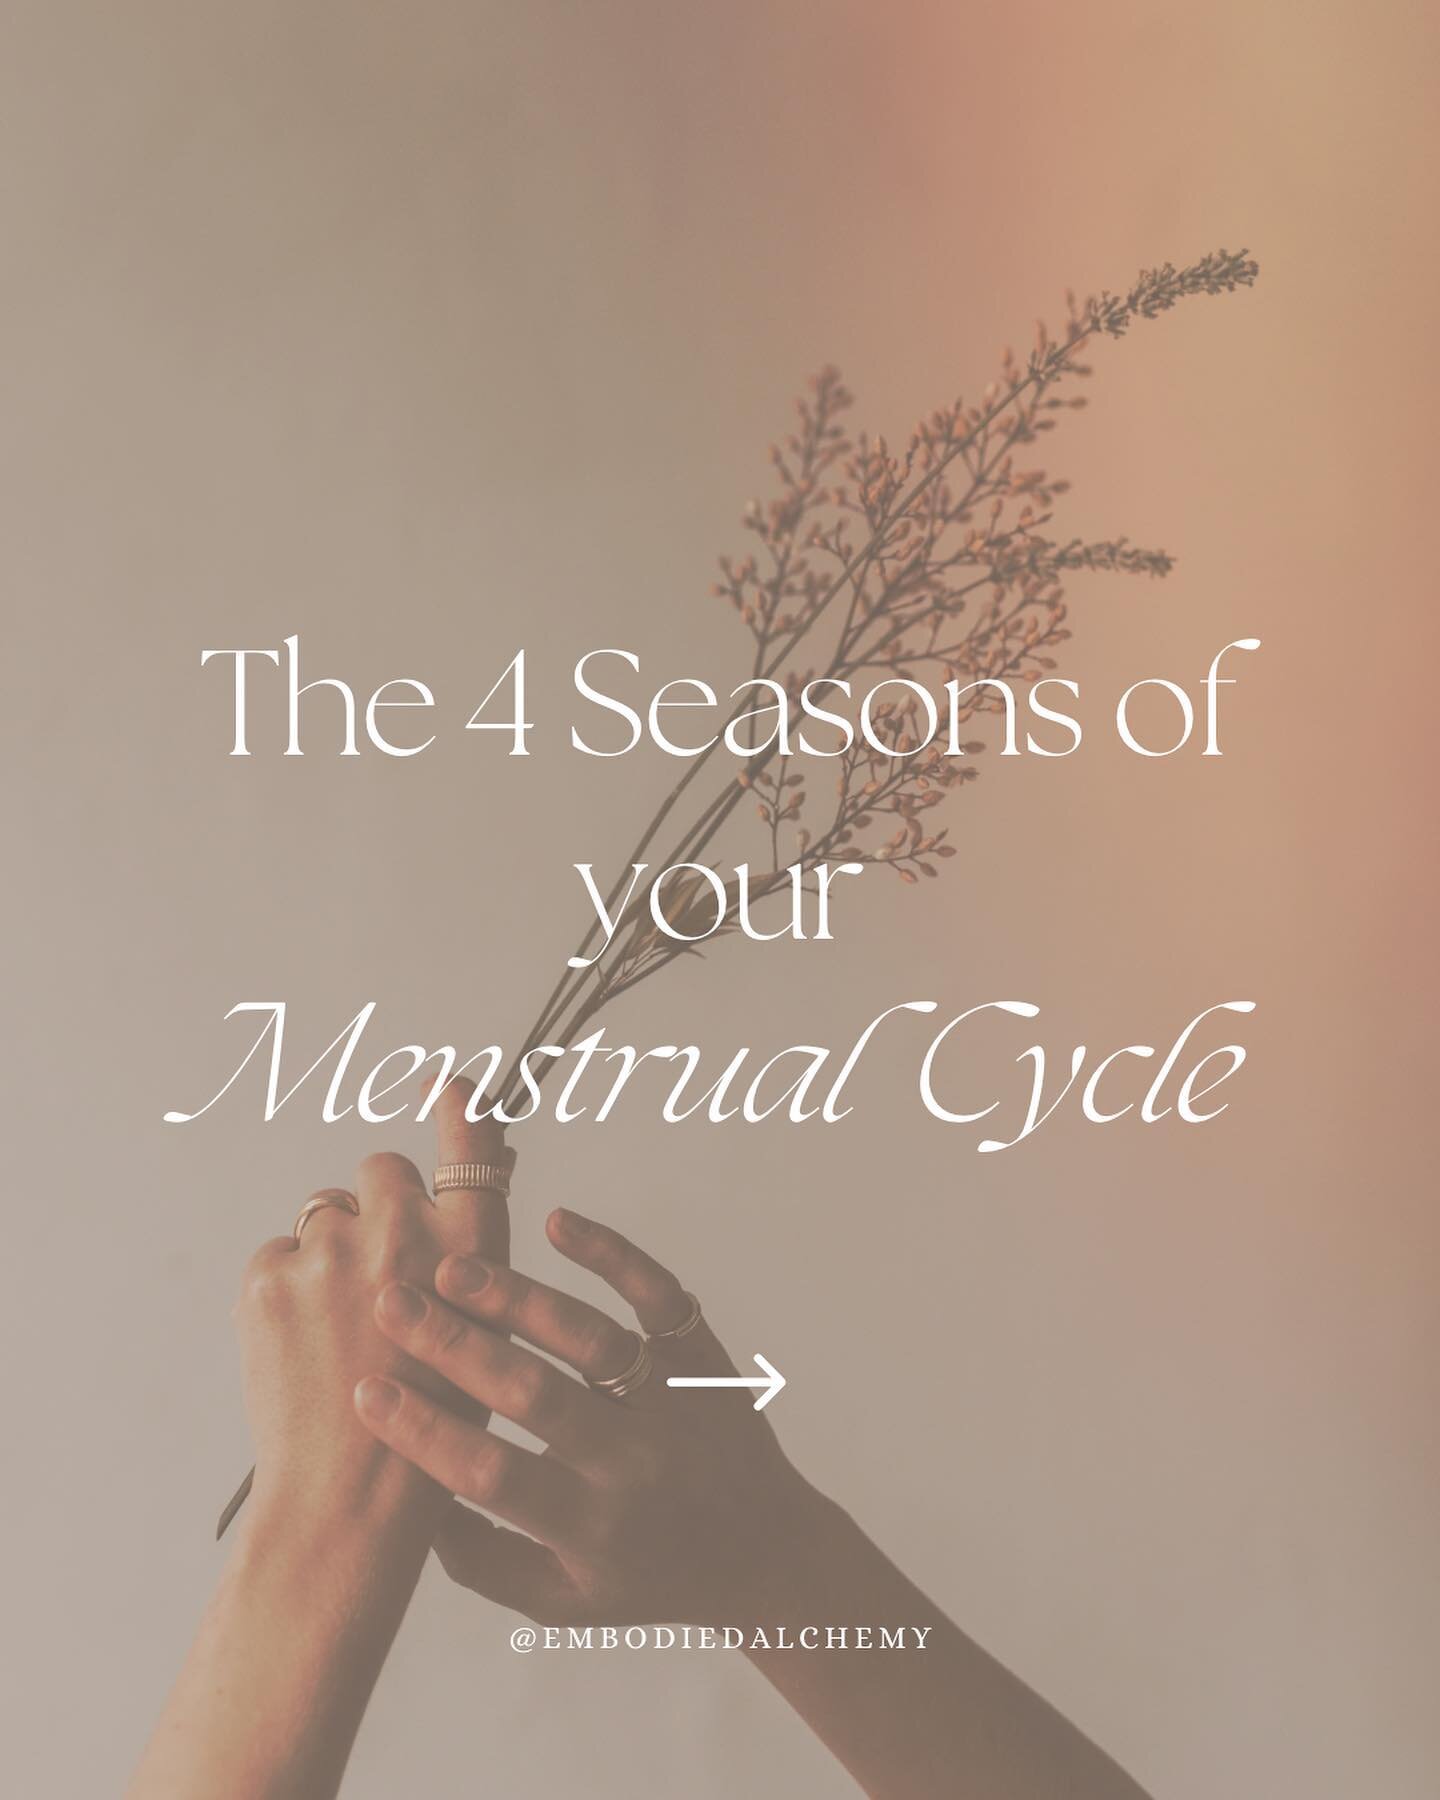 Embracing the ebbs and flows of our menstrual cycle, just like the changing seasons. 

From the blossoming energy of spring to the nurturing embrace of summer, the introspective retreat of autumn, and the gentle surrender of winter. 

Each phase hold